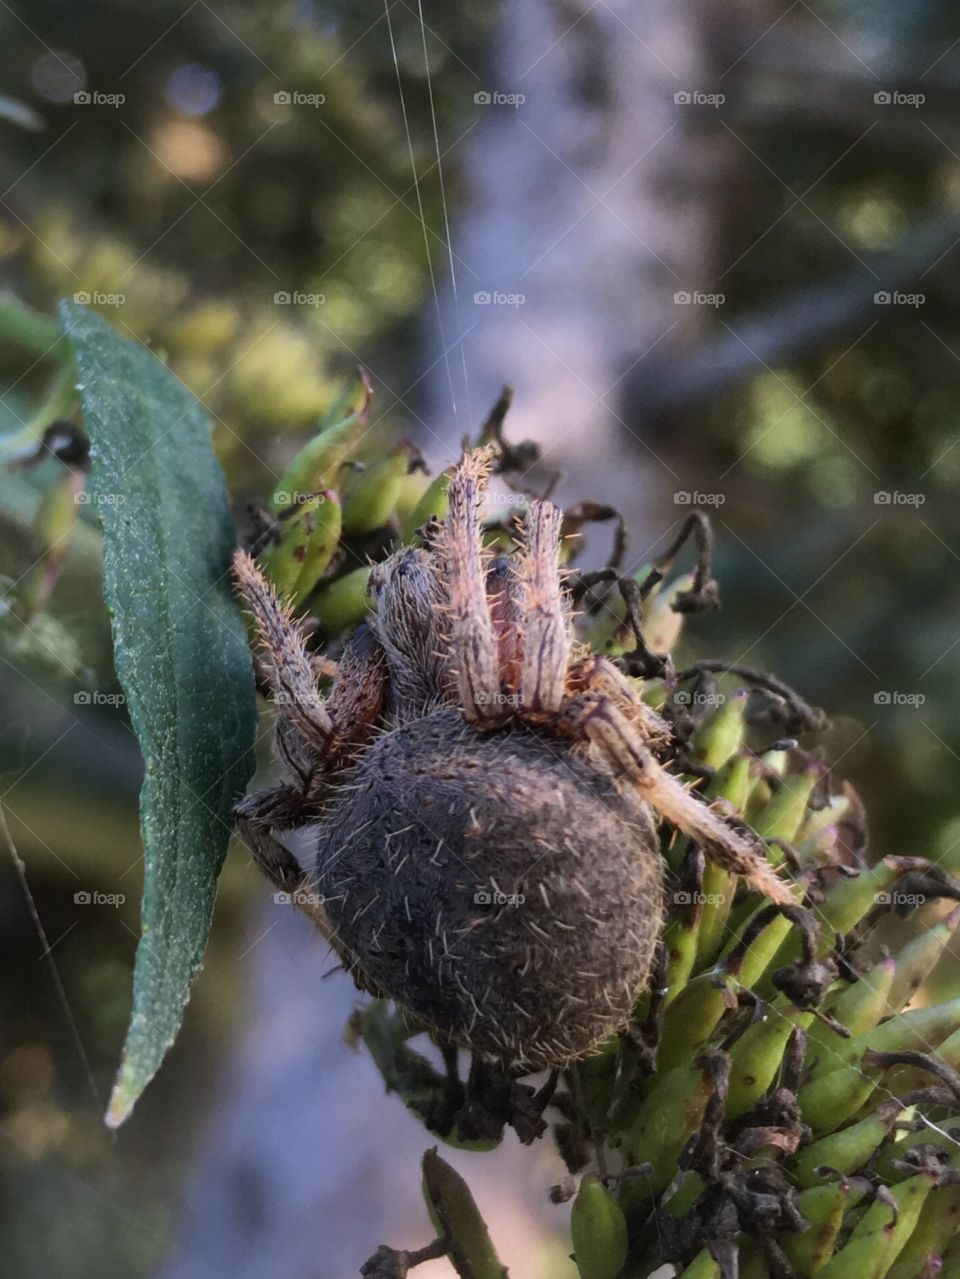 Hairy Spider Climbing on plant